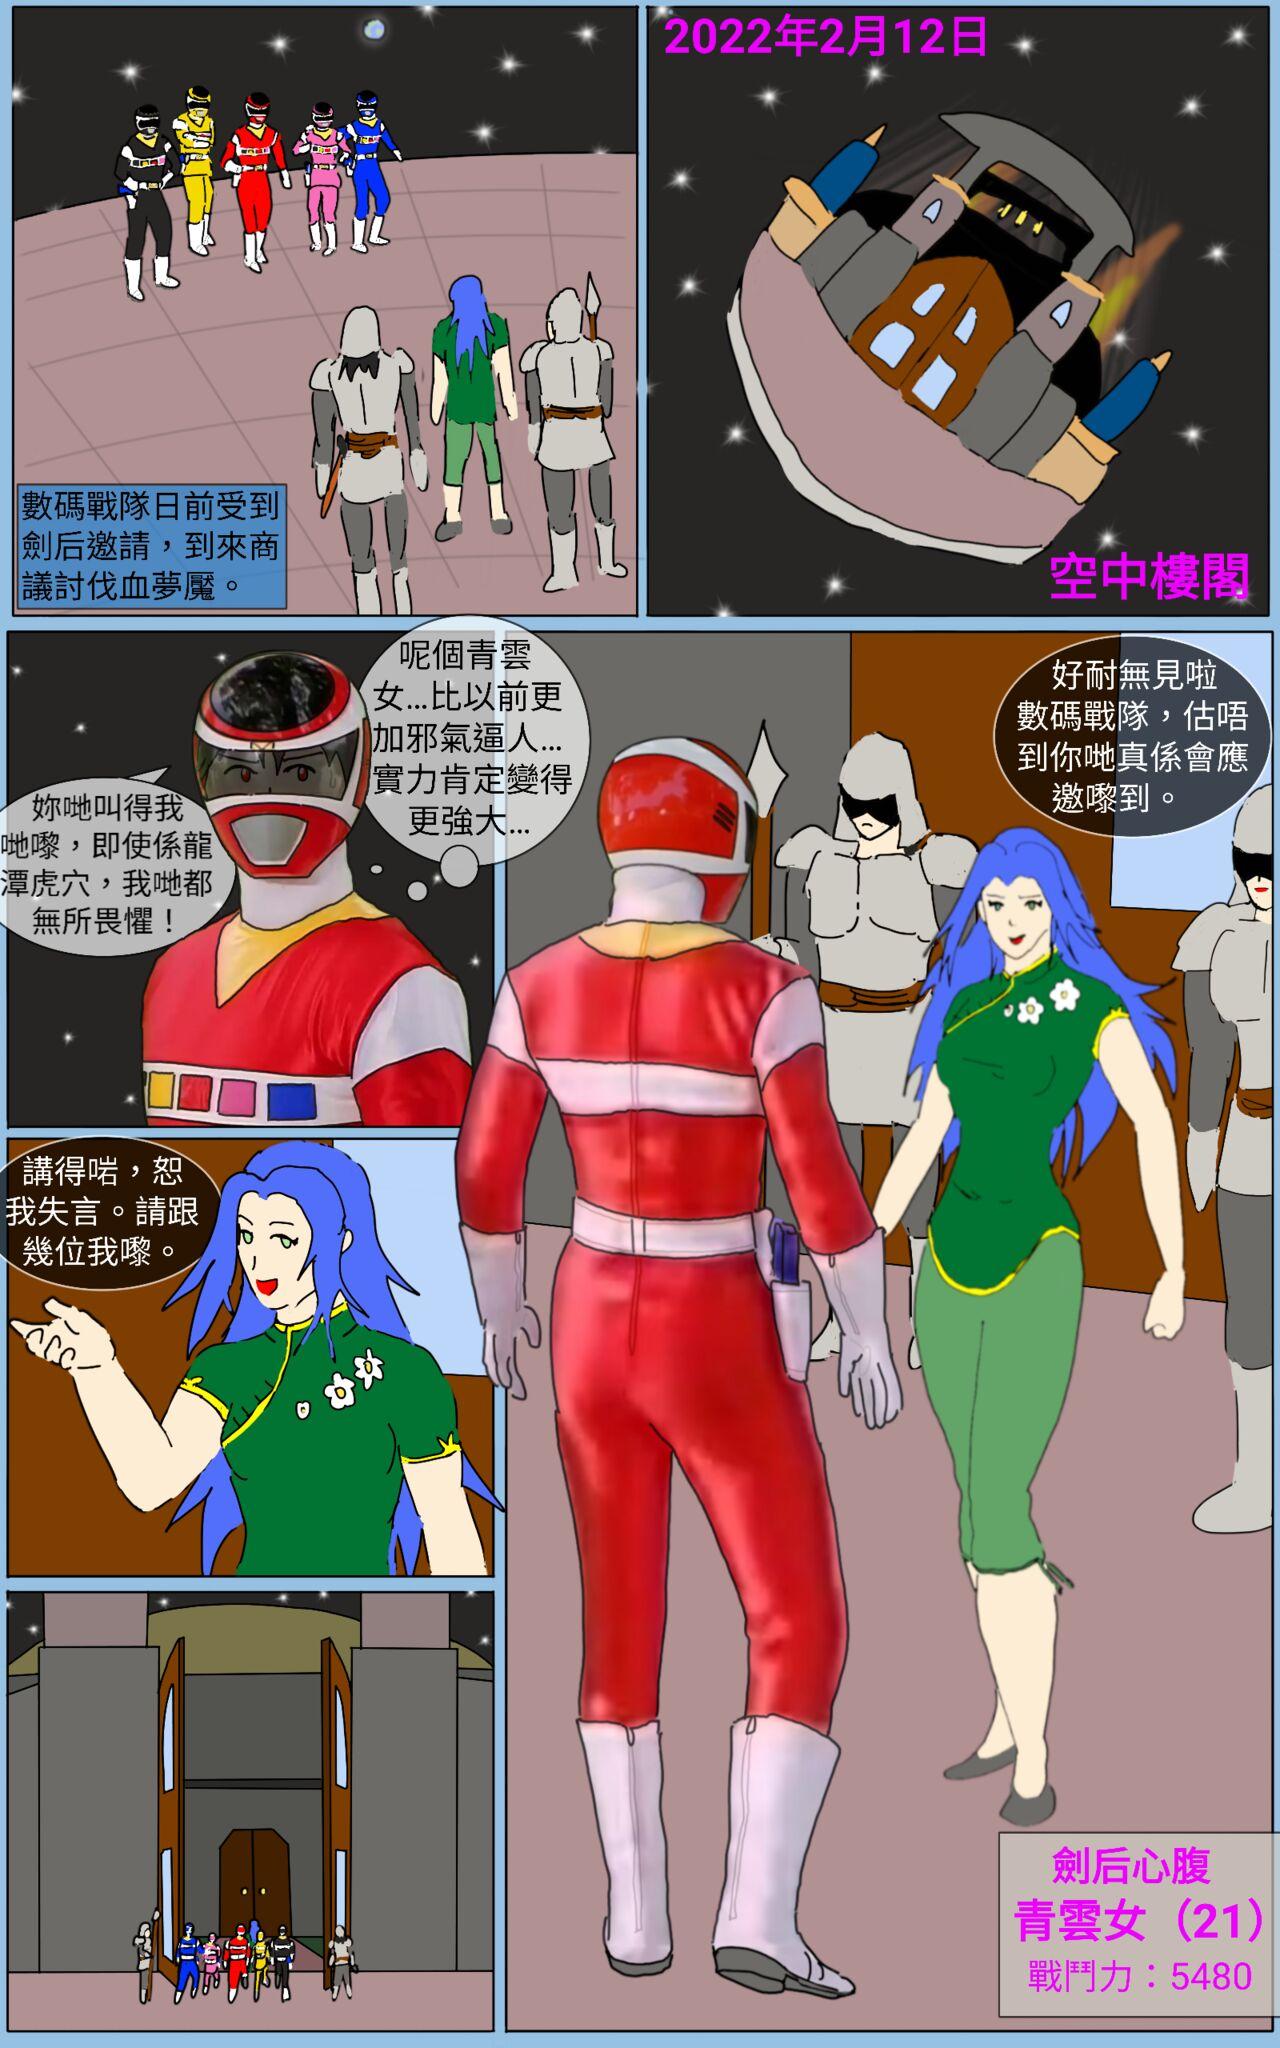 Family Roleplay Mission 32 - Super sentai Mojada - Page 1